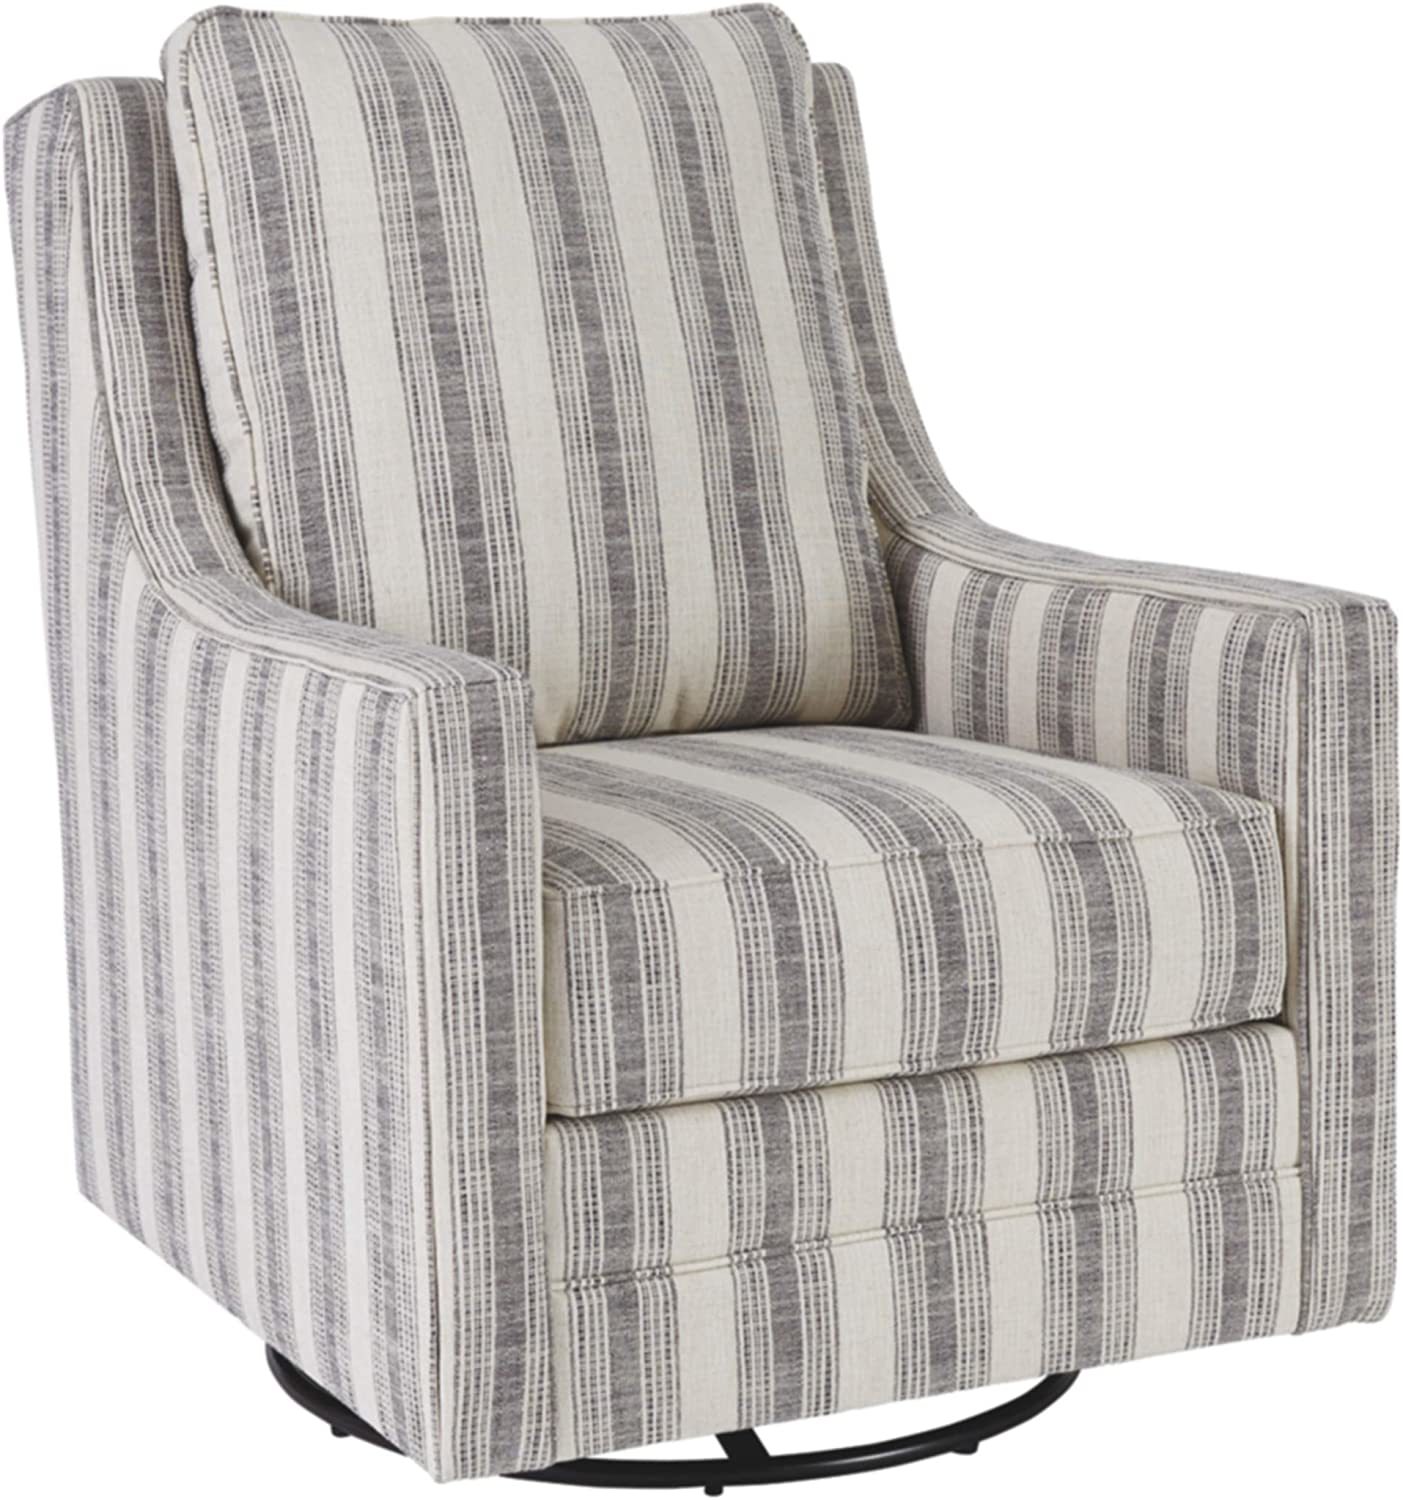 Primary image for Ivory And Black Signature Design By Ashley Kambria Striped Upholstered Swivel